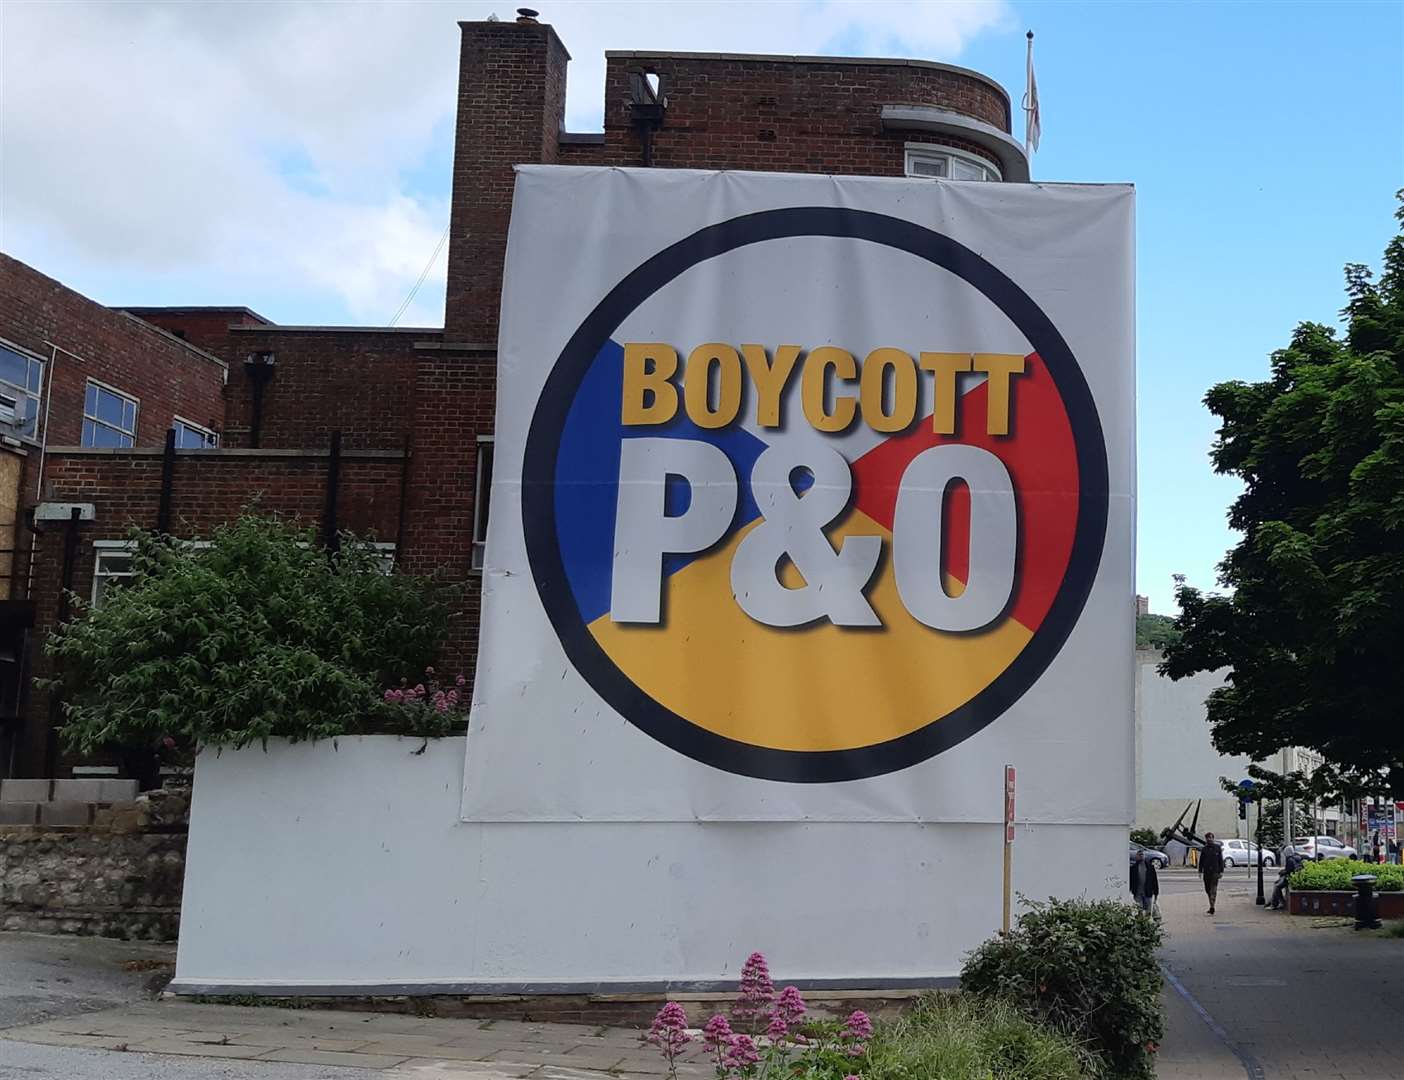 The "boycott P&O" banner on the wall of the RMT base in Dover: Picture: Sam Lennon KMG